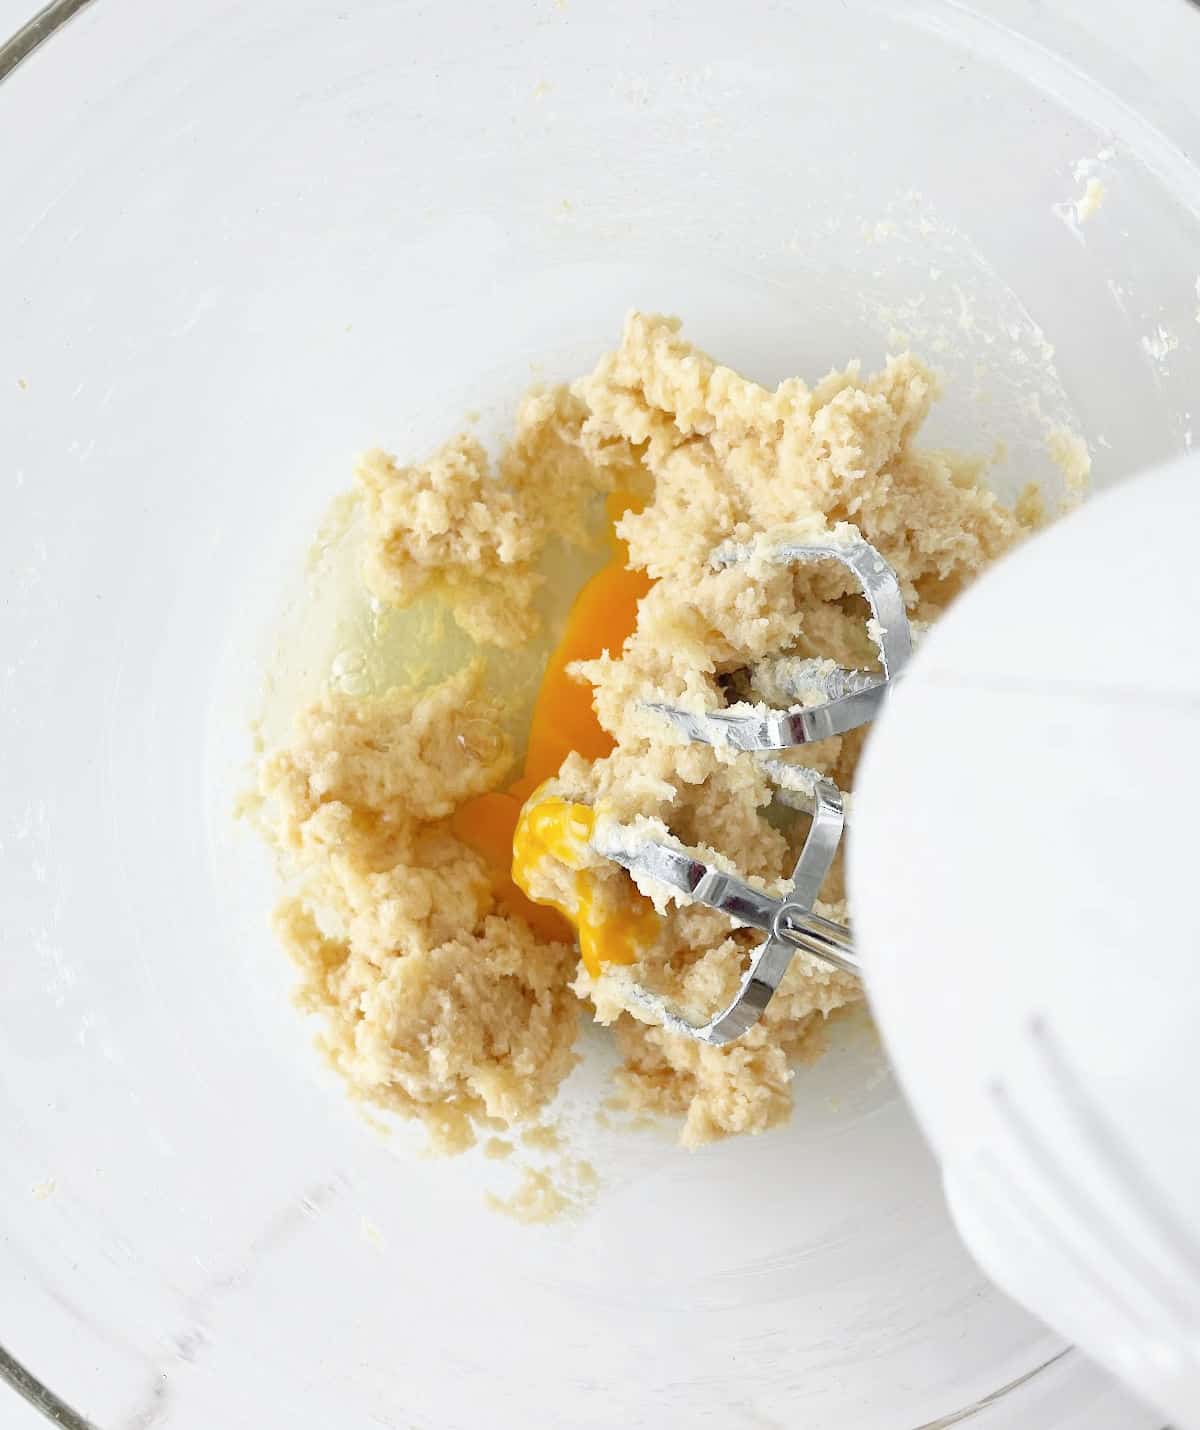 Eggs added to cookie dough mixture in a glass bowl with an electric mixer. White marble surface.